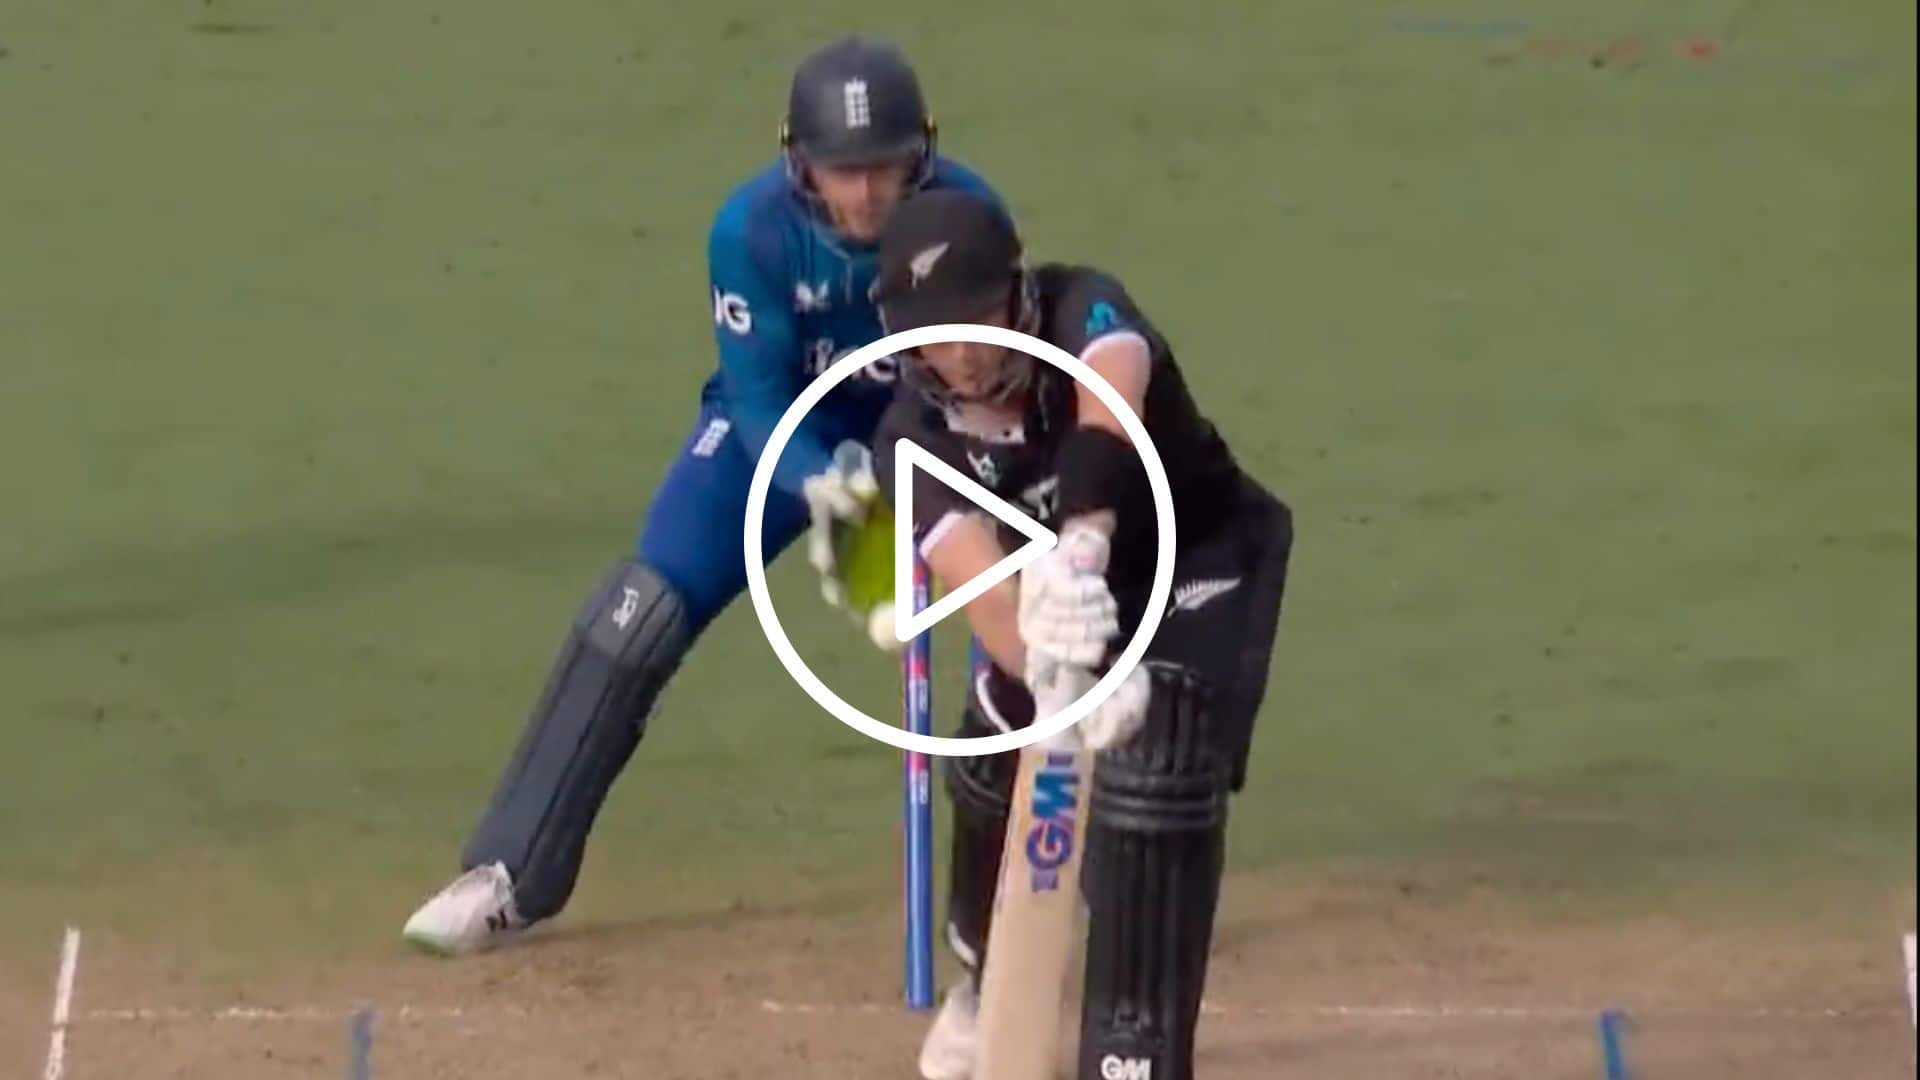 [Watch] Adil Rashid's Unplayable Delivery Knocks Over Will Young